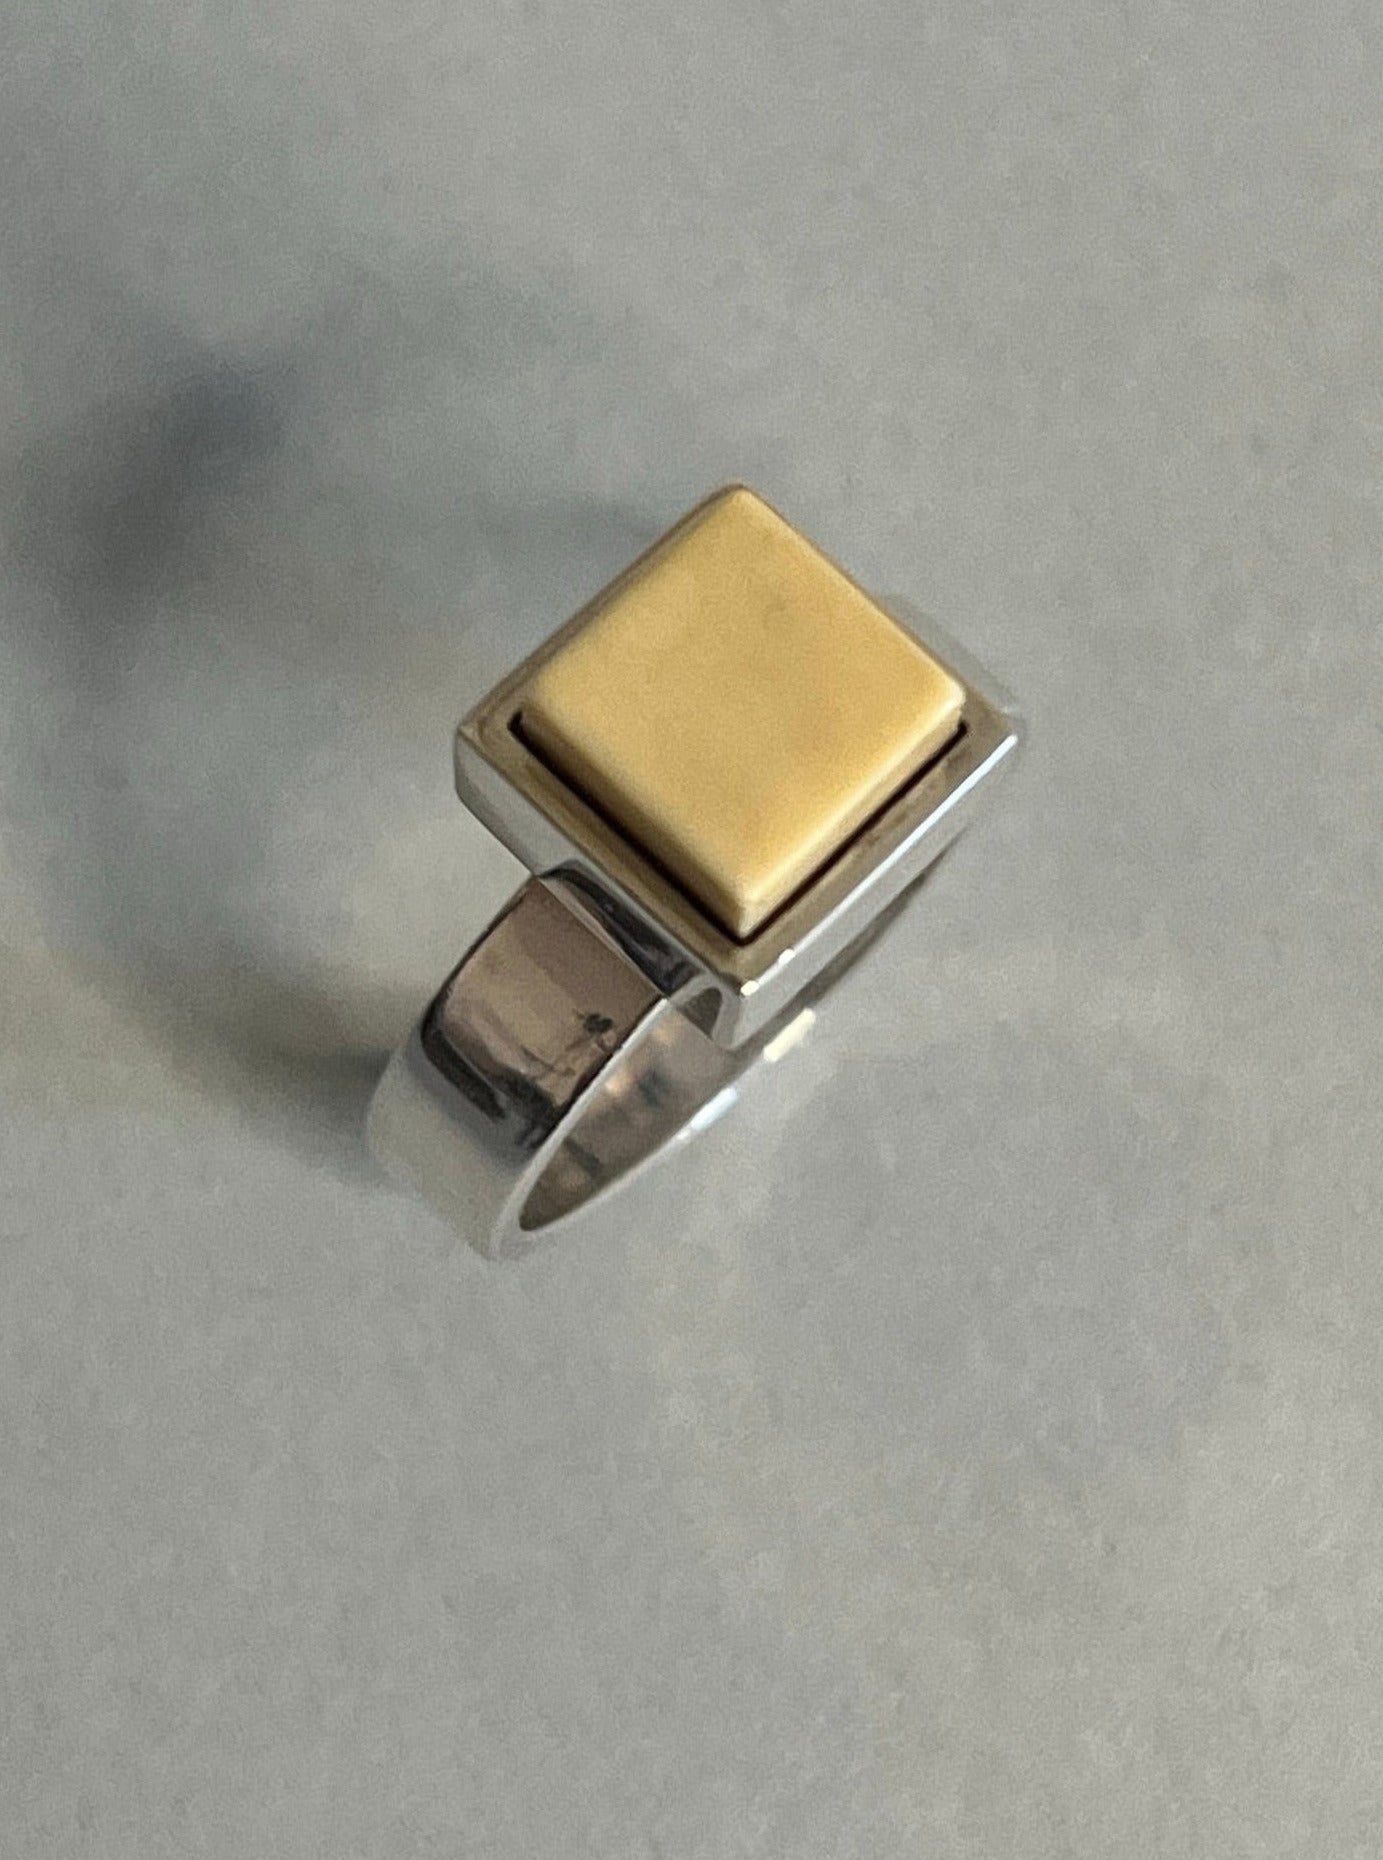 RING WITH SQUARE YELLOW JADE STONE